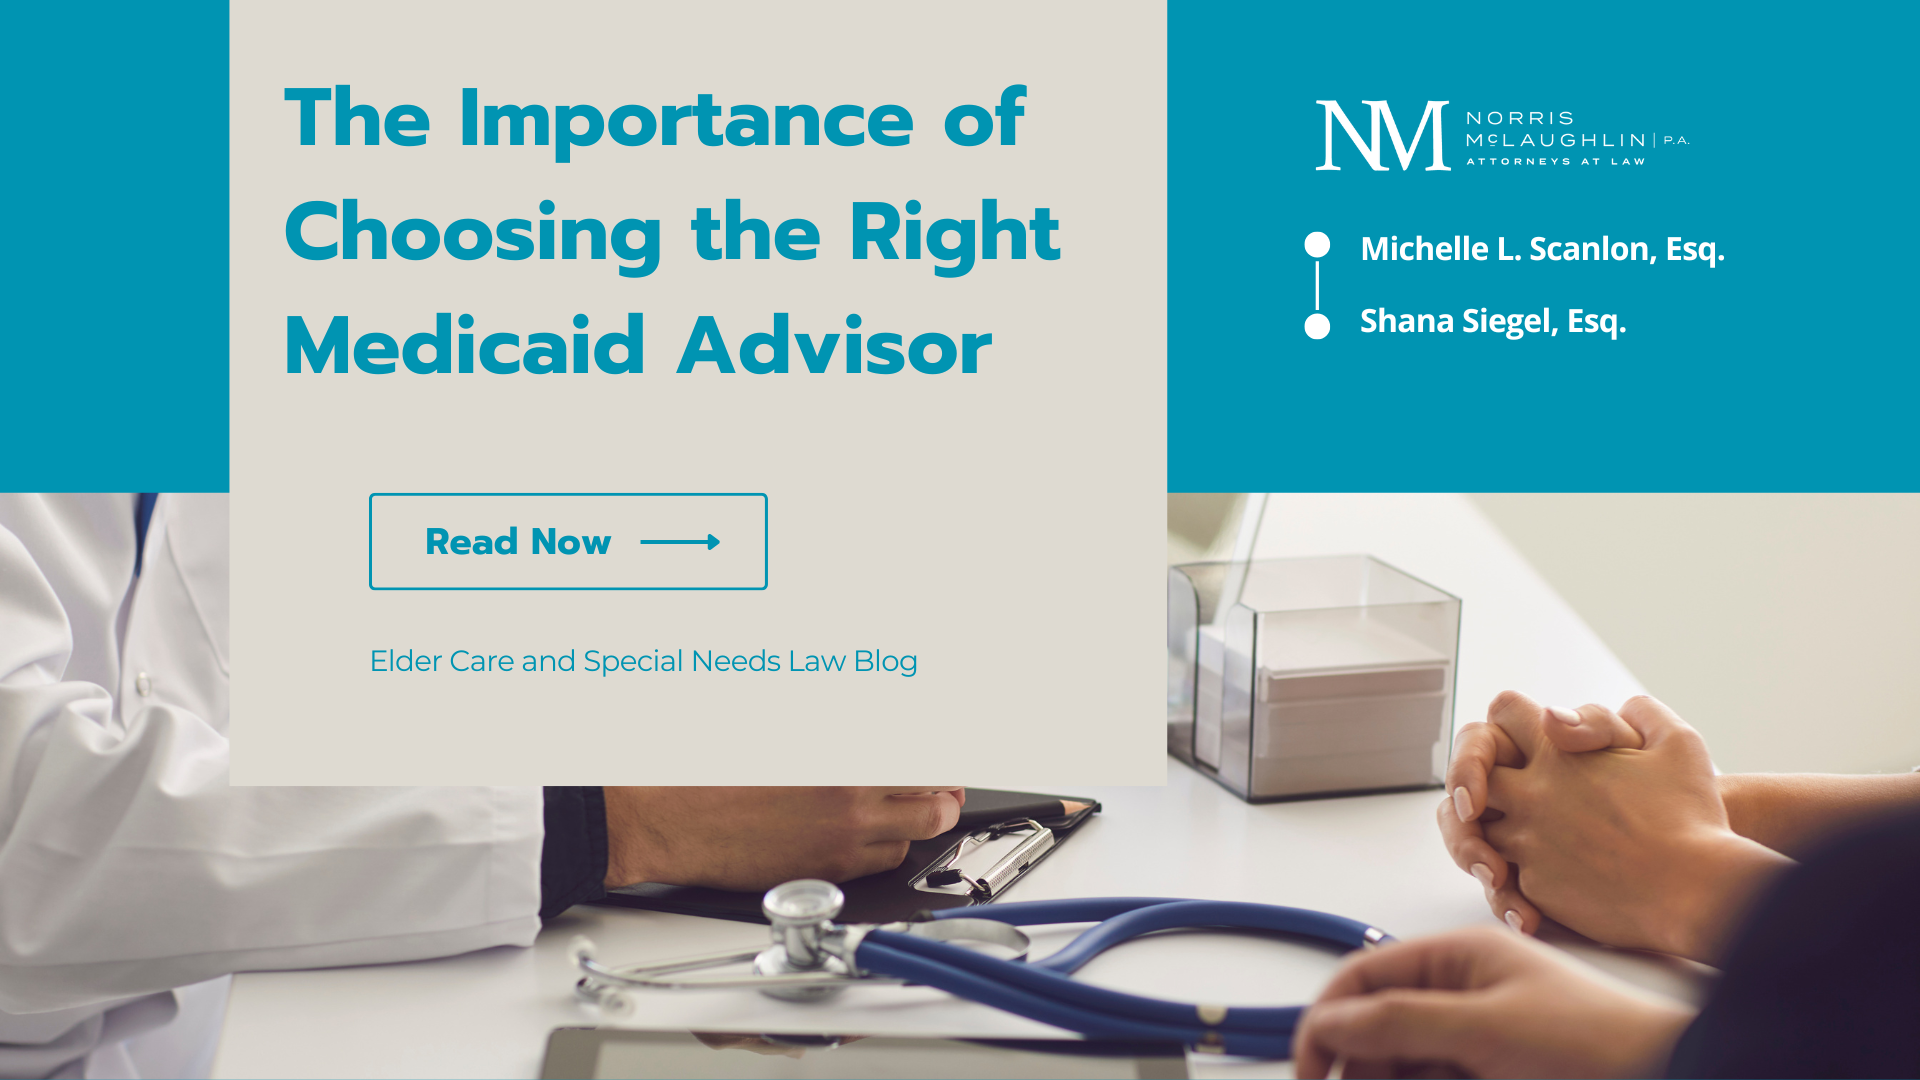 “The Importance of Choosing the Right Medicaid Advisor”